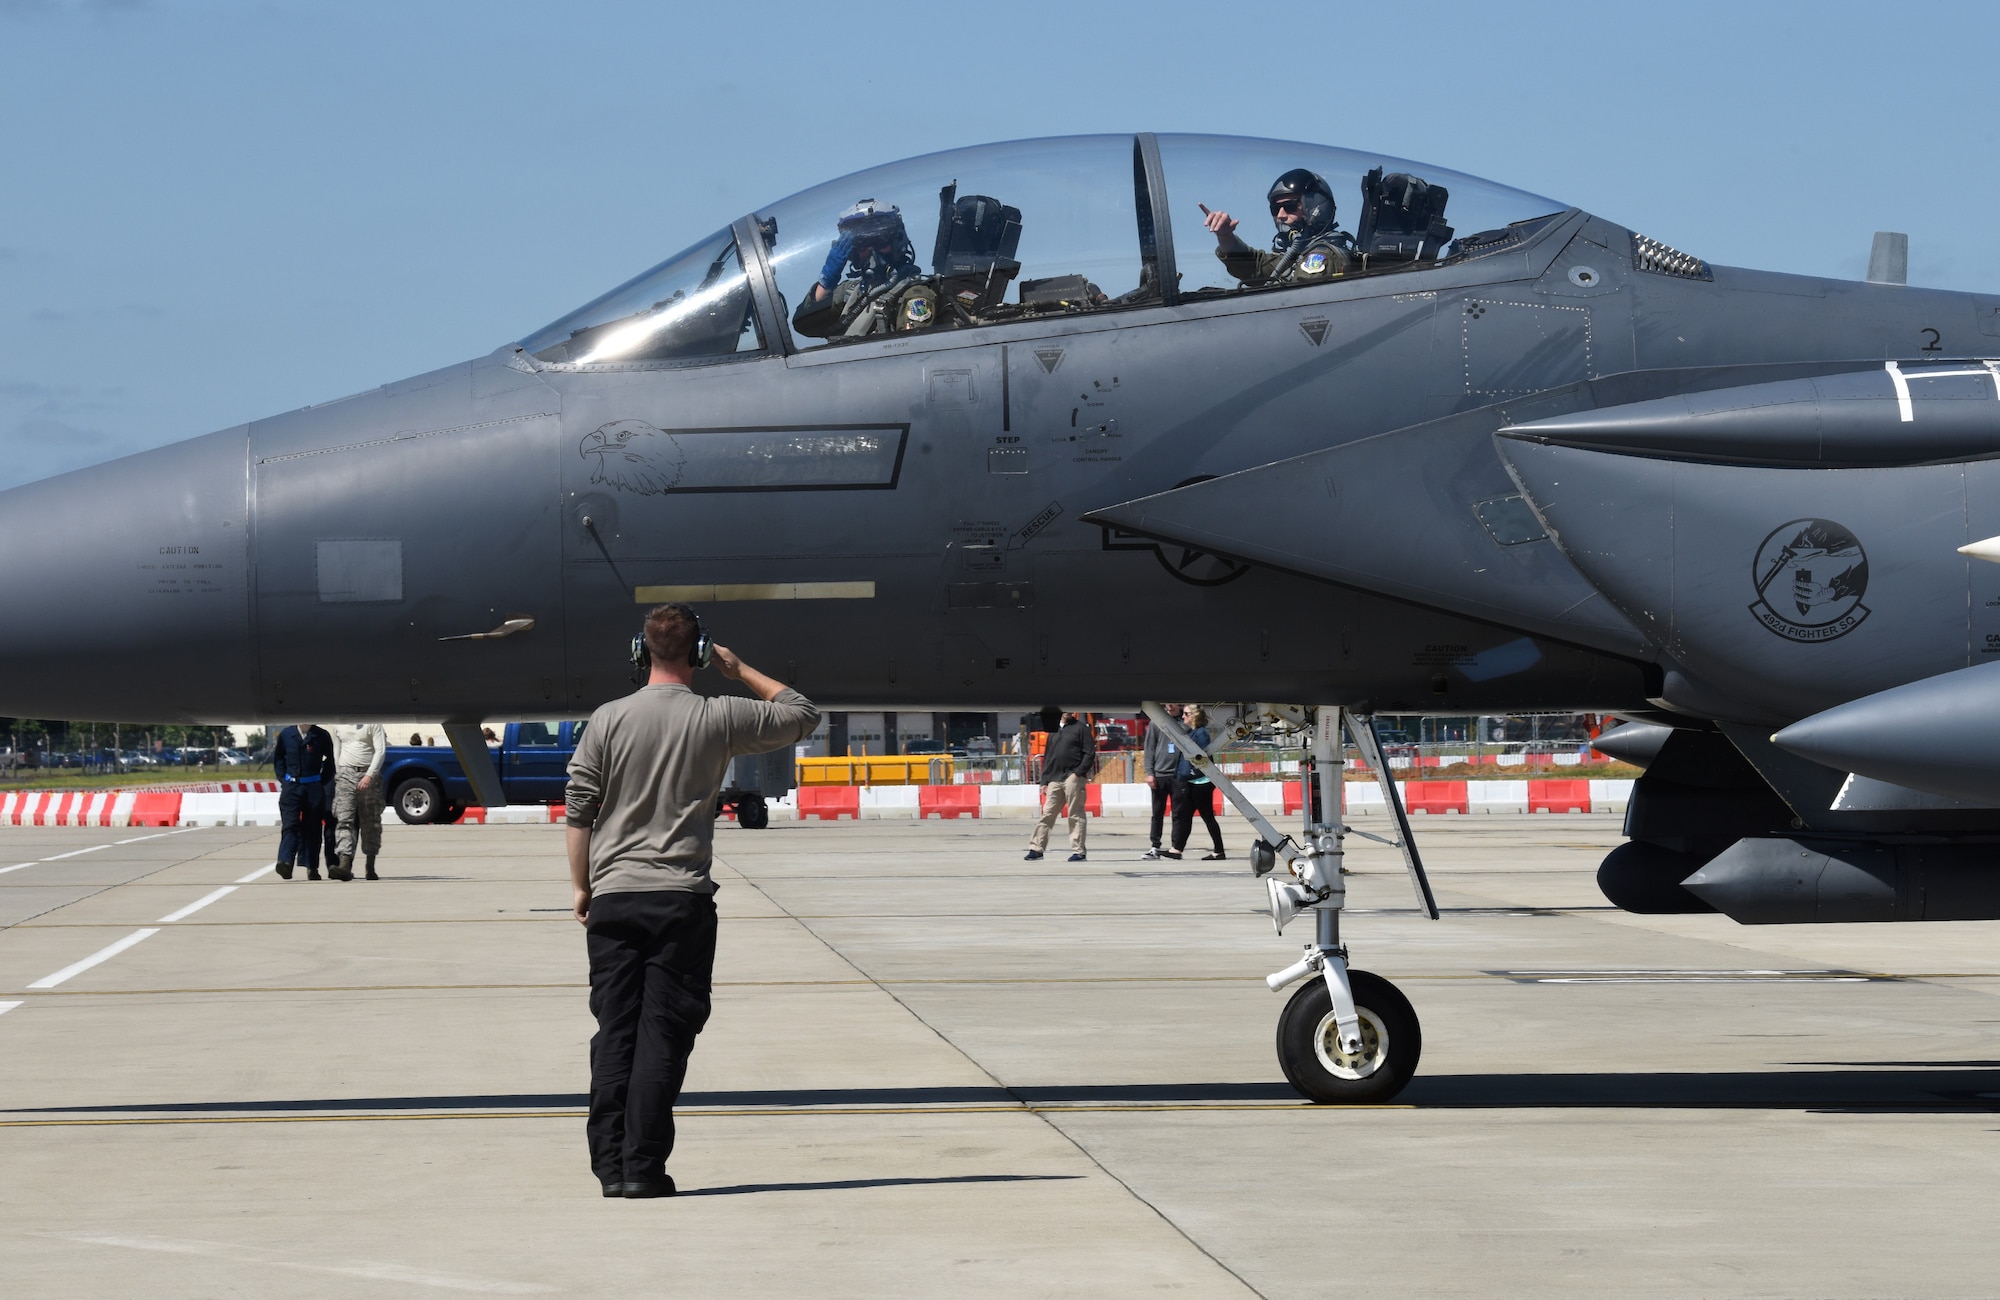 An aircraft maintainer, assigned to the 48th Maintenance Group, renders a salute to an F-15E Strike Eagle pilot before takeoff during Point Blank 19-2 at Royal Air Force Lakenheath, England, June 27, 2019. Approximately 52 aircraft from the U.S., France, and the U.K. participated in the exercise. (U.S. Air Force photo by Airman 1st Class Rhonda Smith)